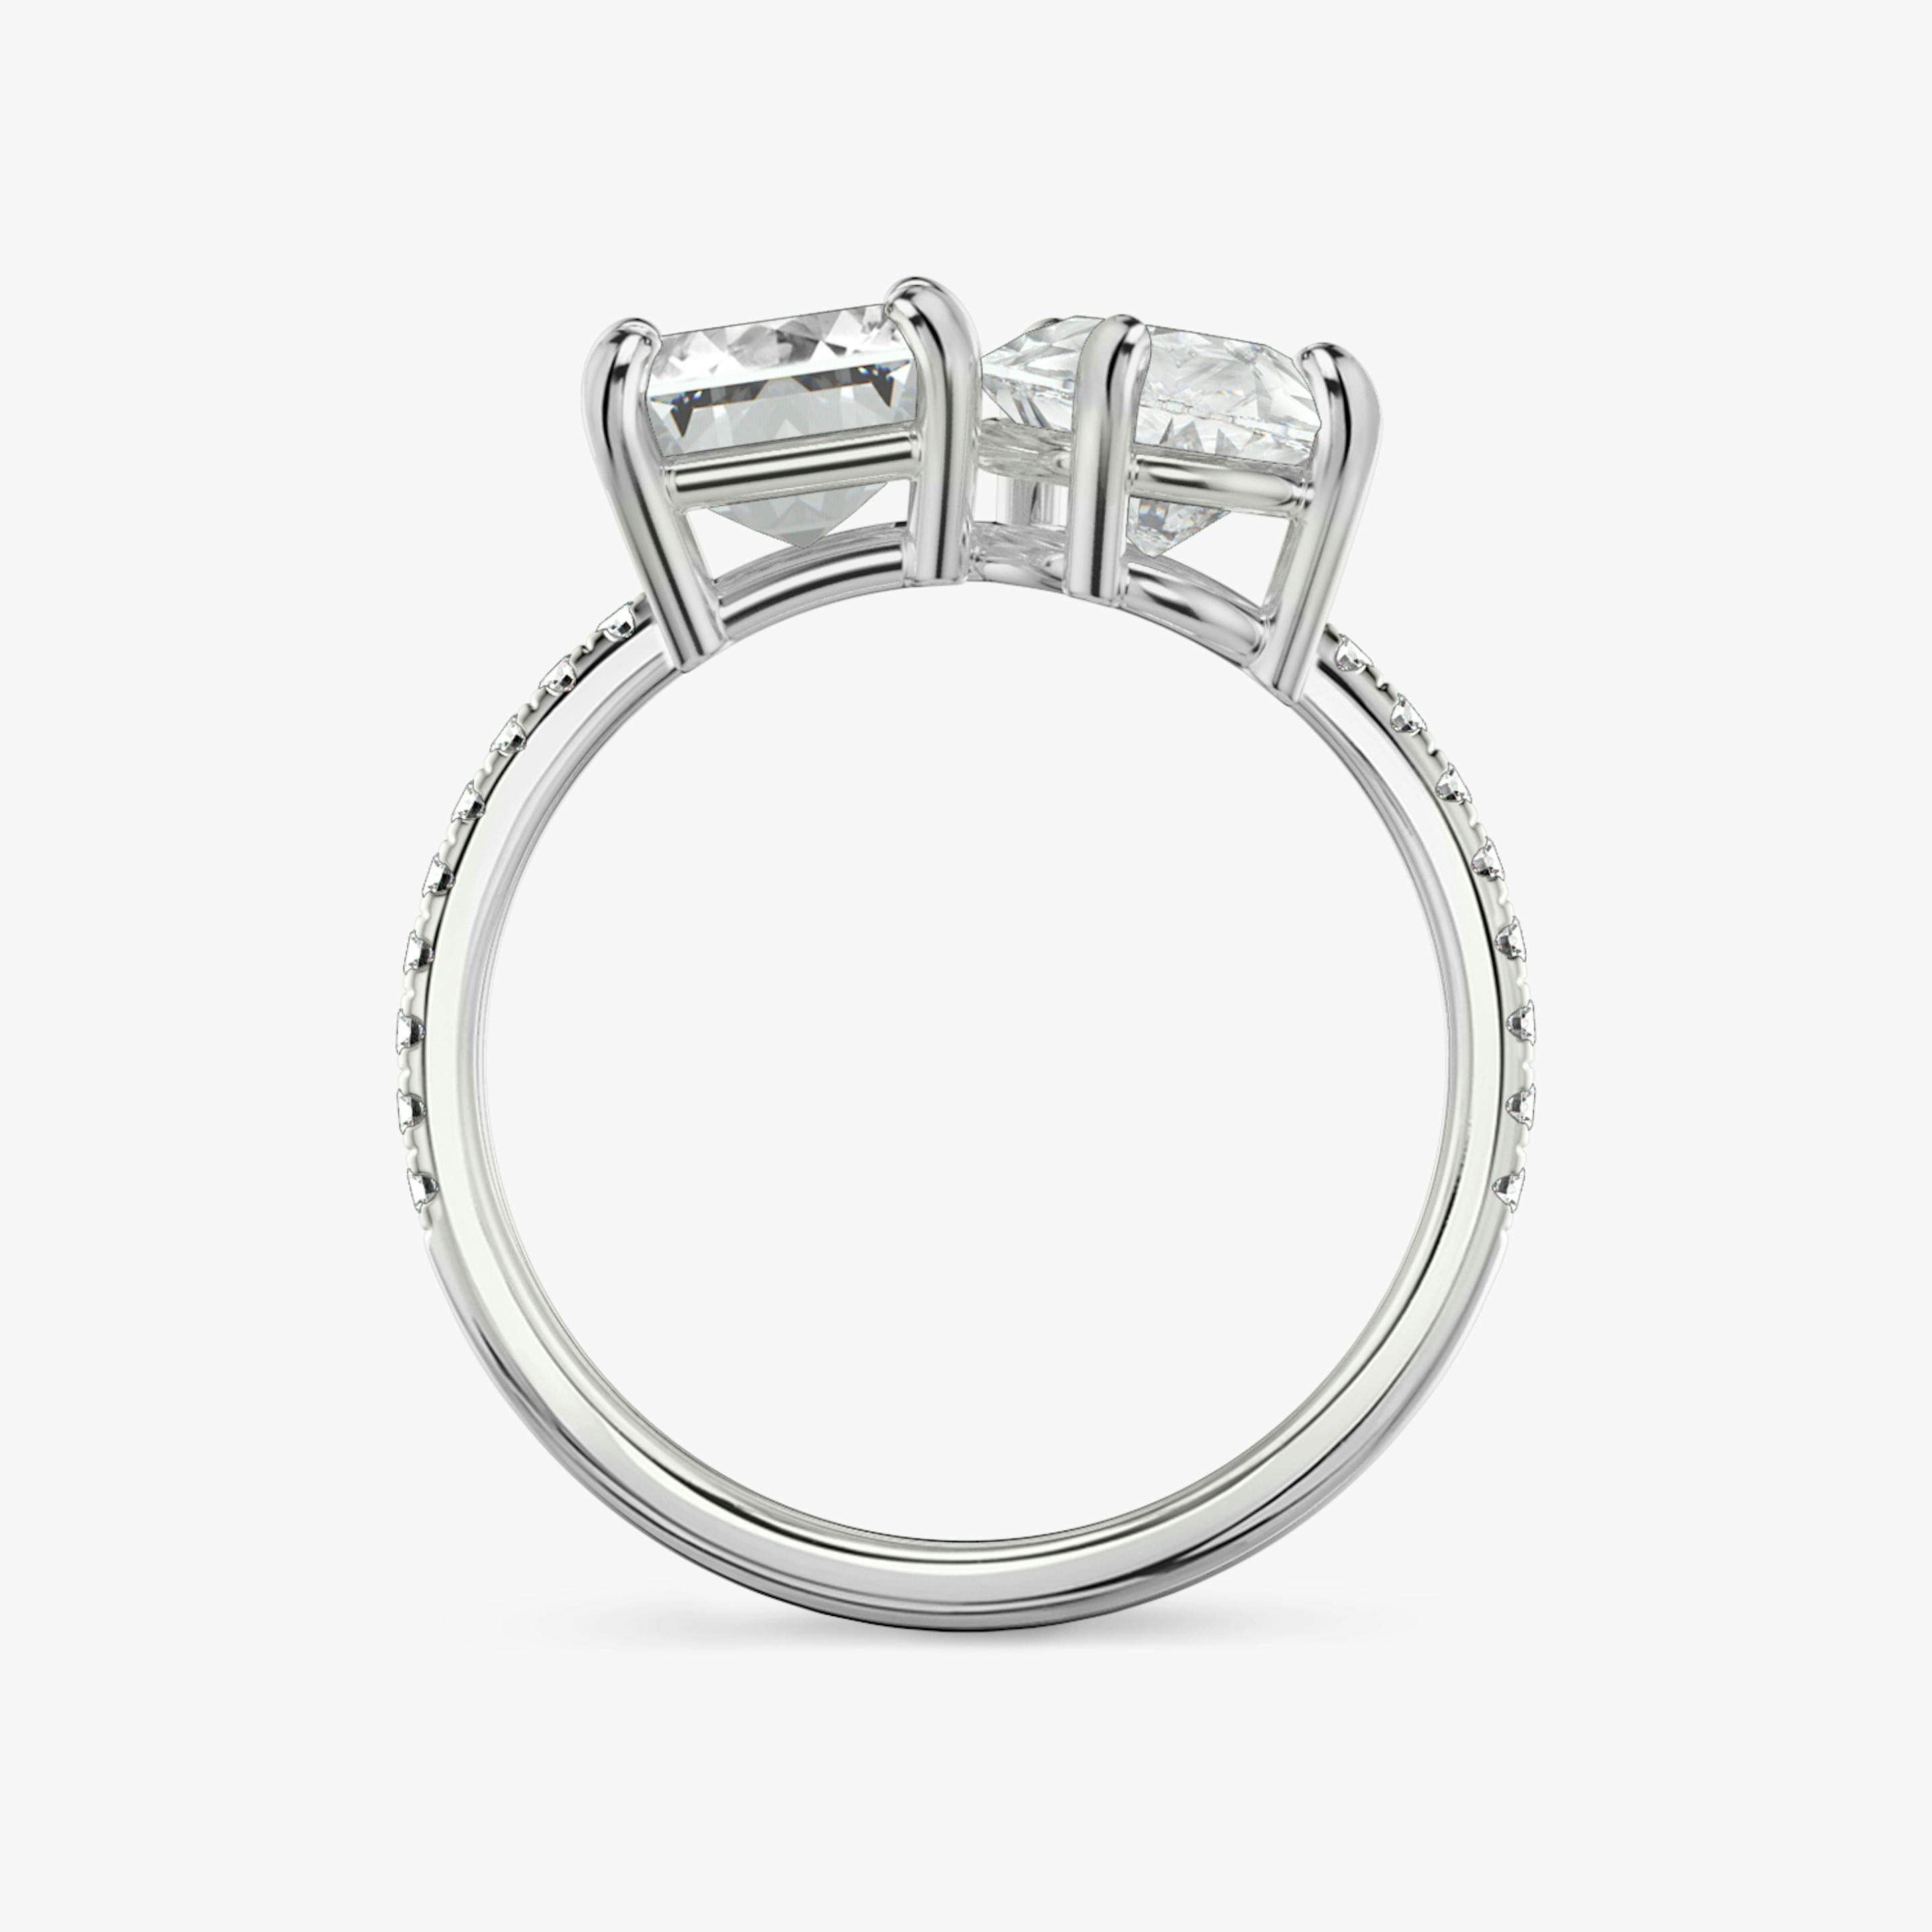 The Toi et Moi | Emerald and Pear | Platinum | Band: Pavé | Diamond orientation: vertical | Carat weight: See full inventory